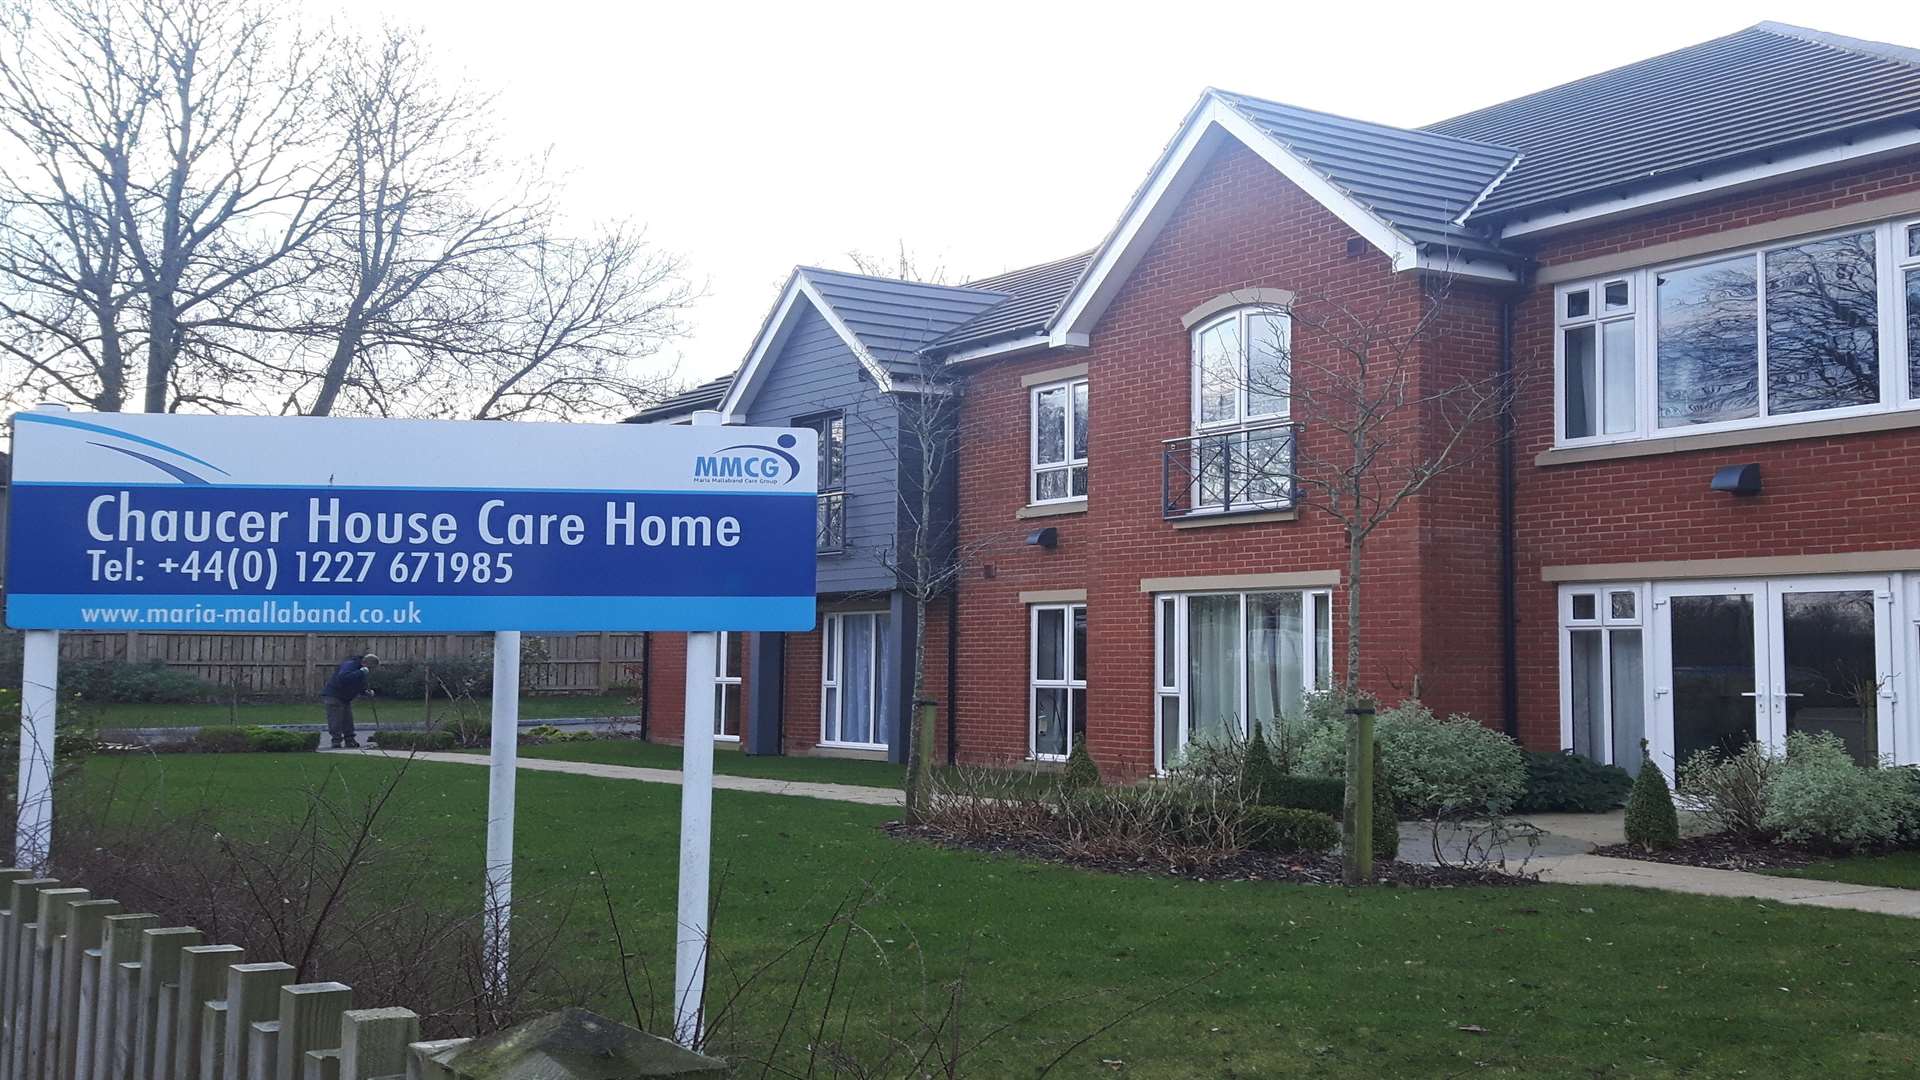 Inspectors say Chaucer House Care Home "requires improvement"